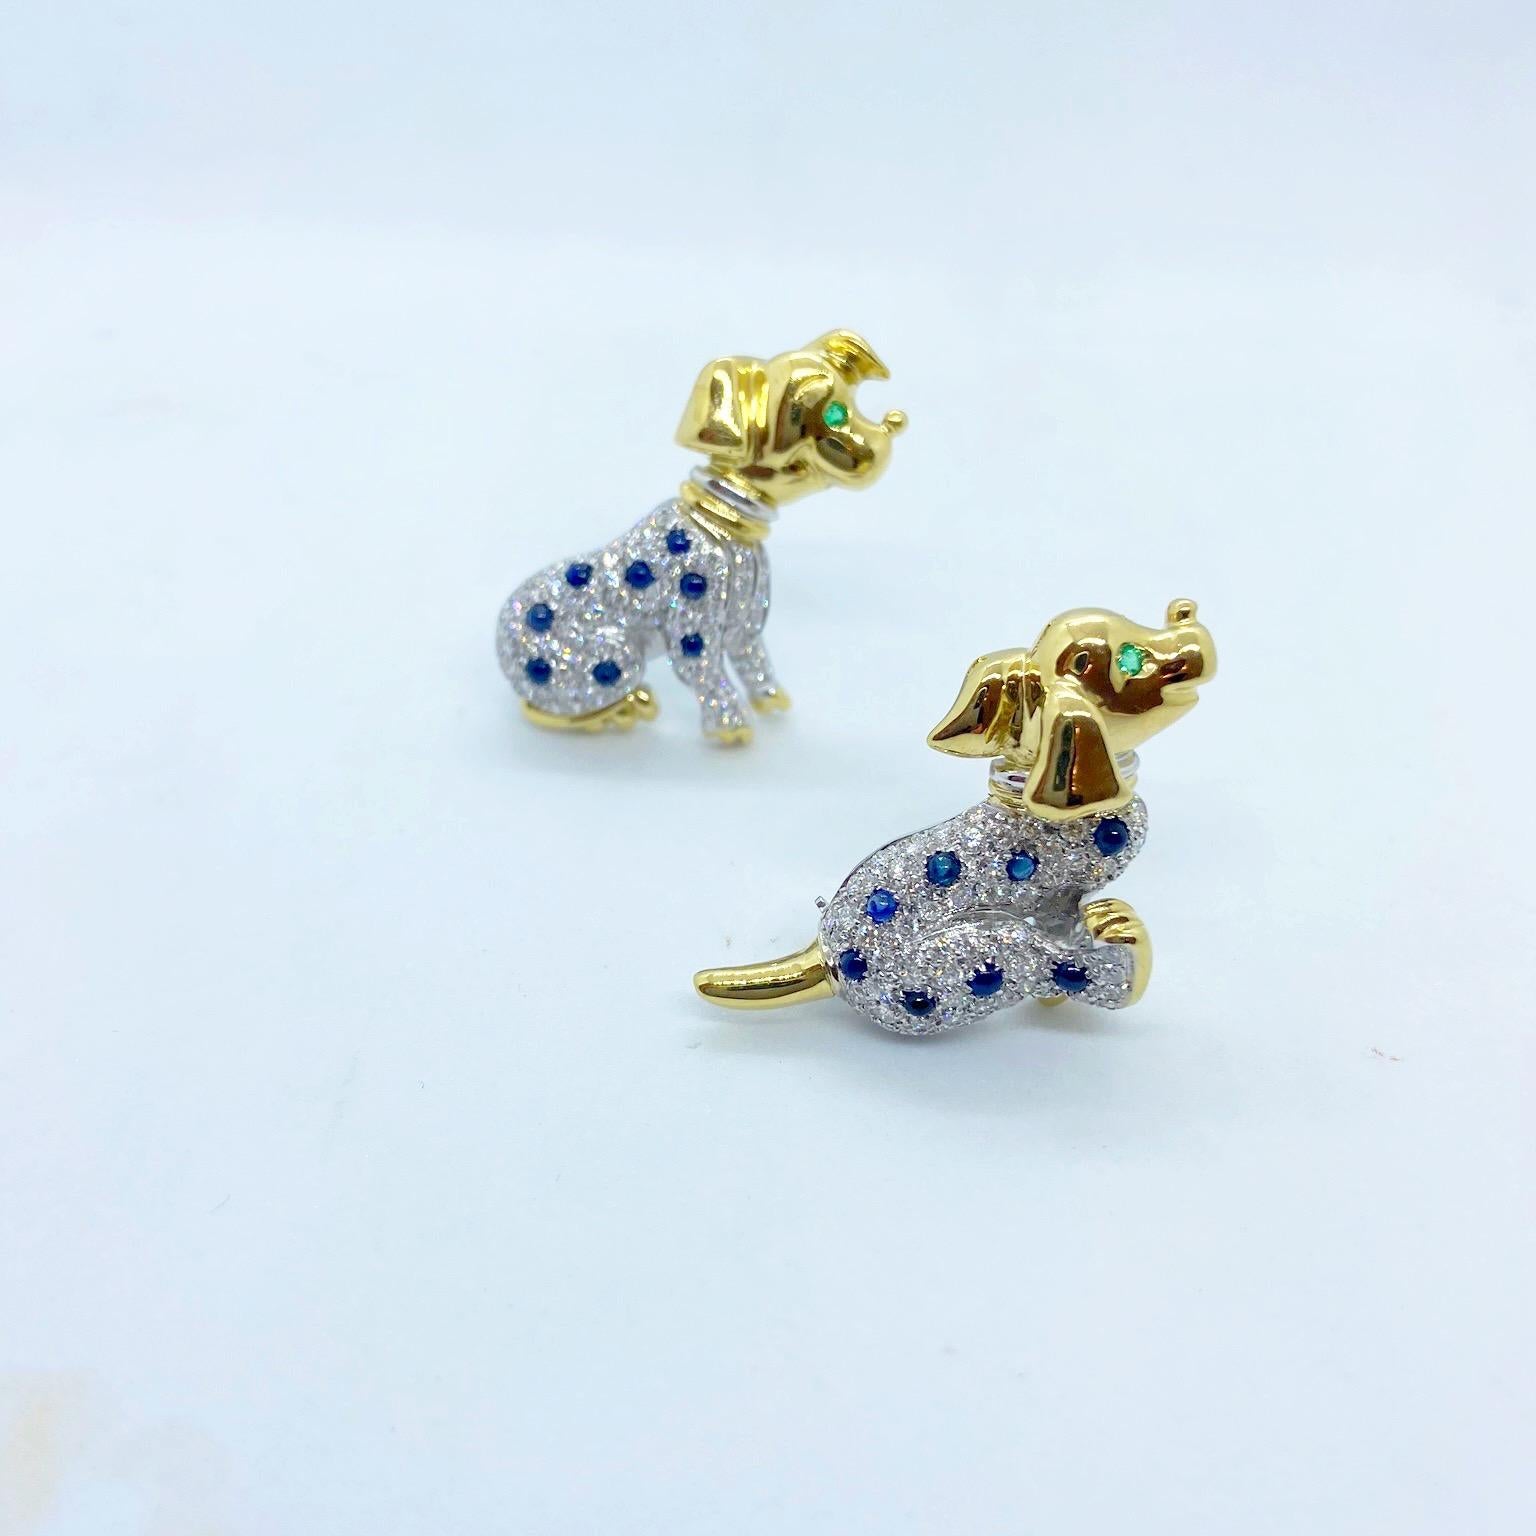 18 karat gold brooch designed as a dalmatian. dog running. The white gold body is set with pave diamonds and scattered cabochon blue sapphires. The head and paws are shiny yellow gold and the eye is set with a round emerald.
Diamond weight 0.98